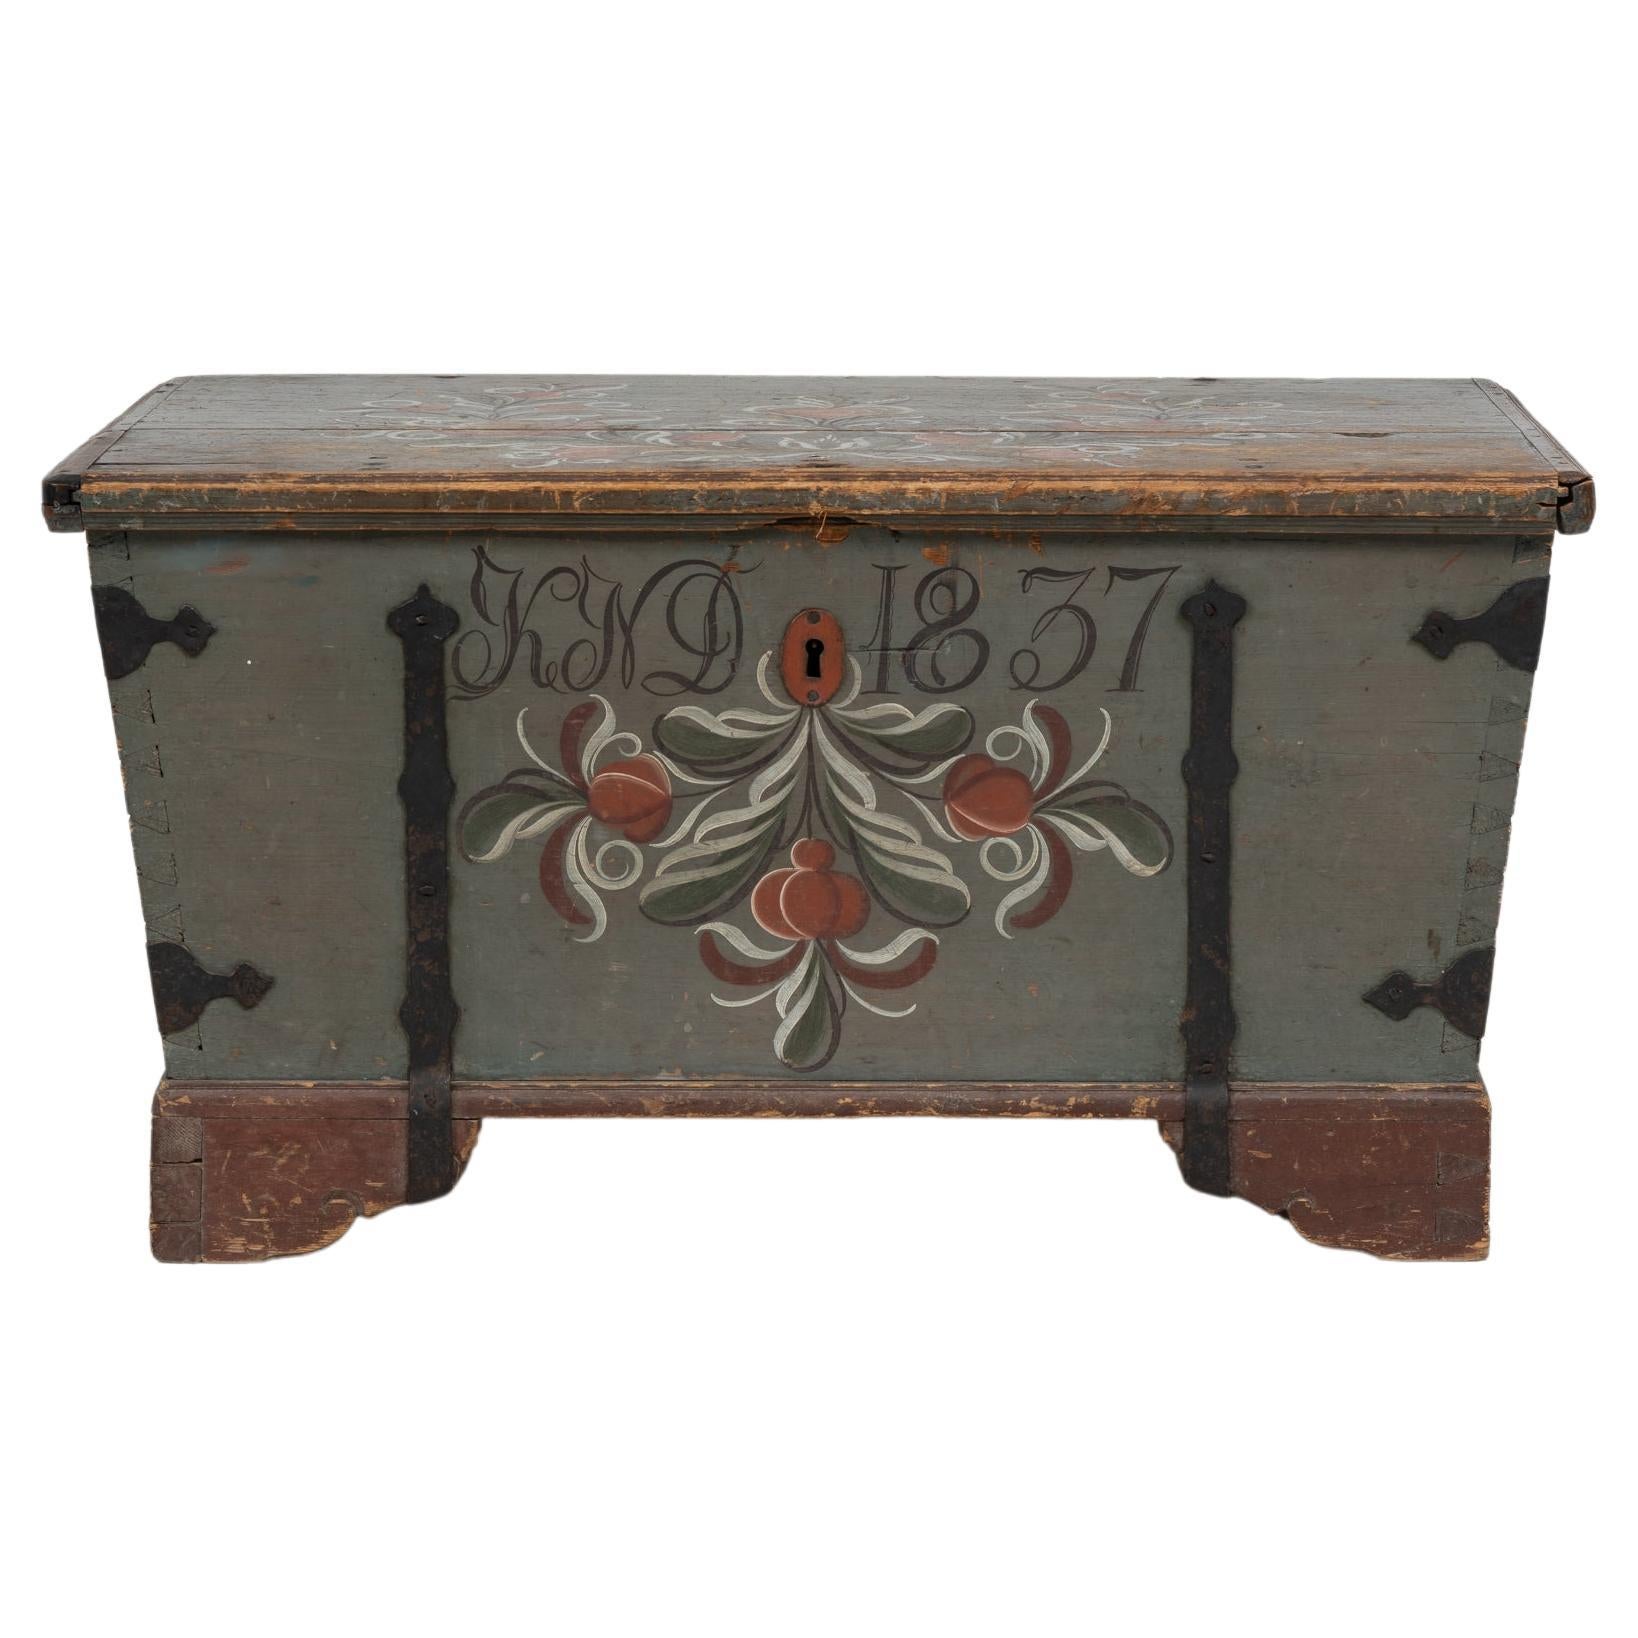 19th Century Northern Swedish Painted Chest